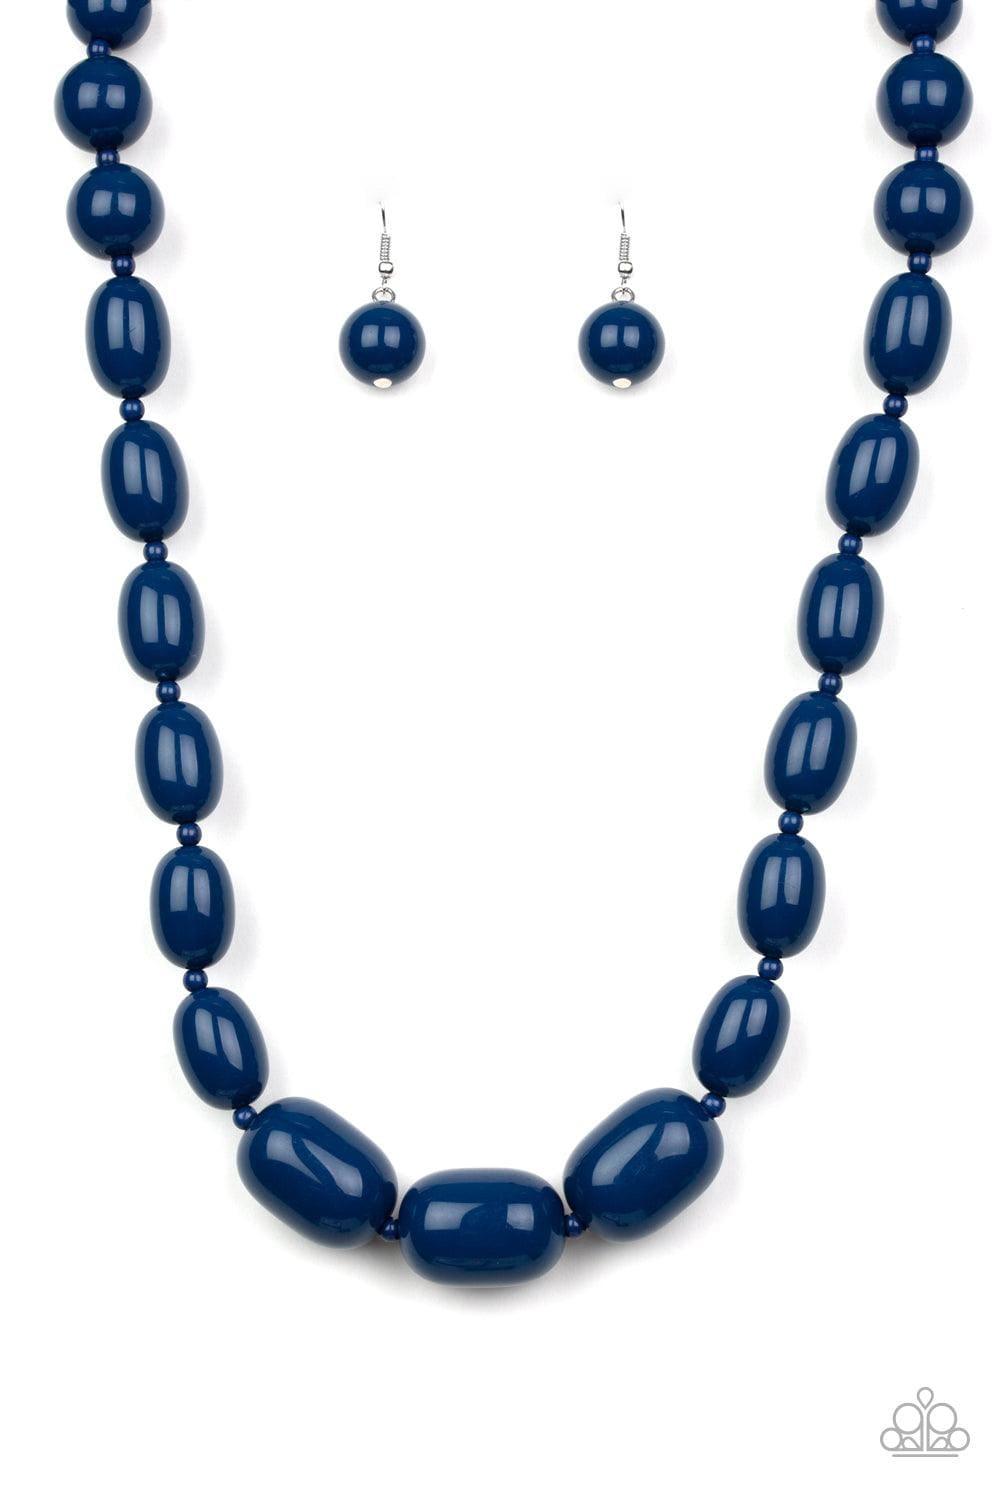 Paparazzi Accessories - Poppin Popularity - Blue Necklace - Bling by JessieK